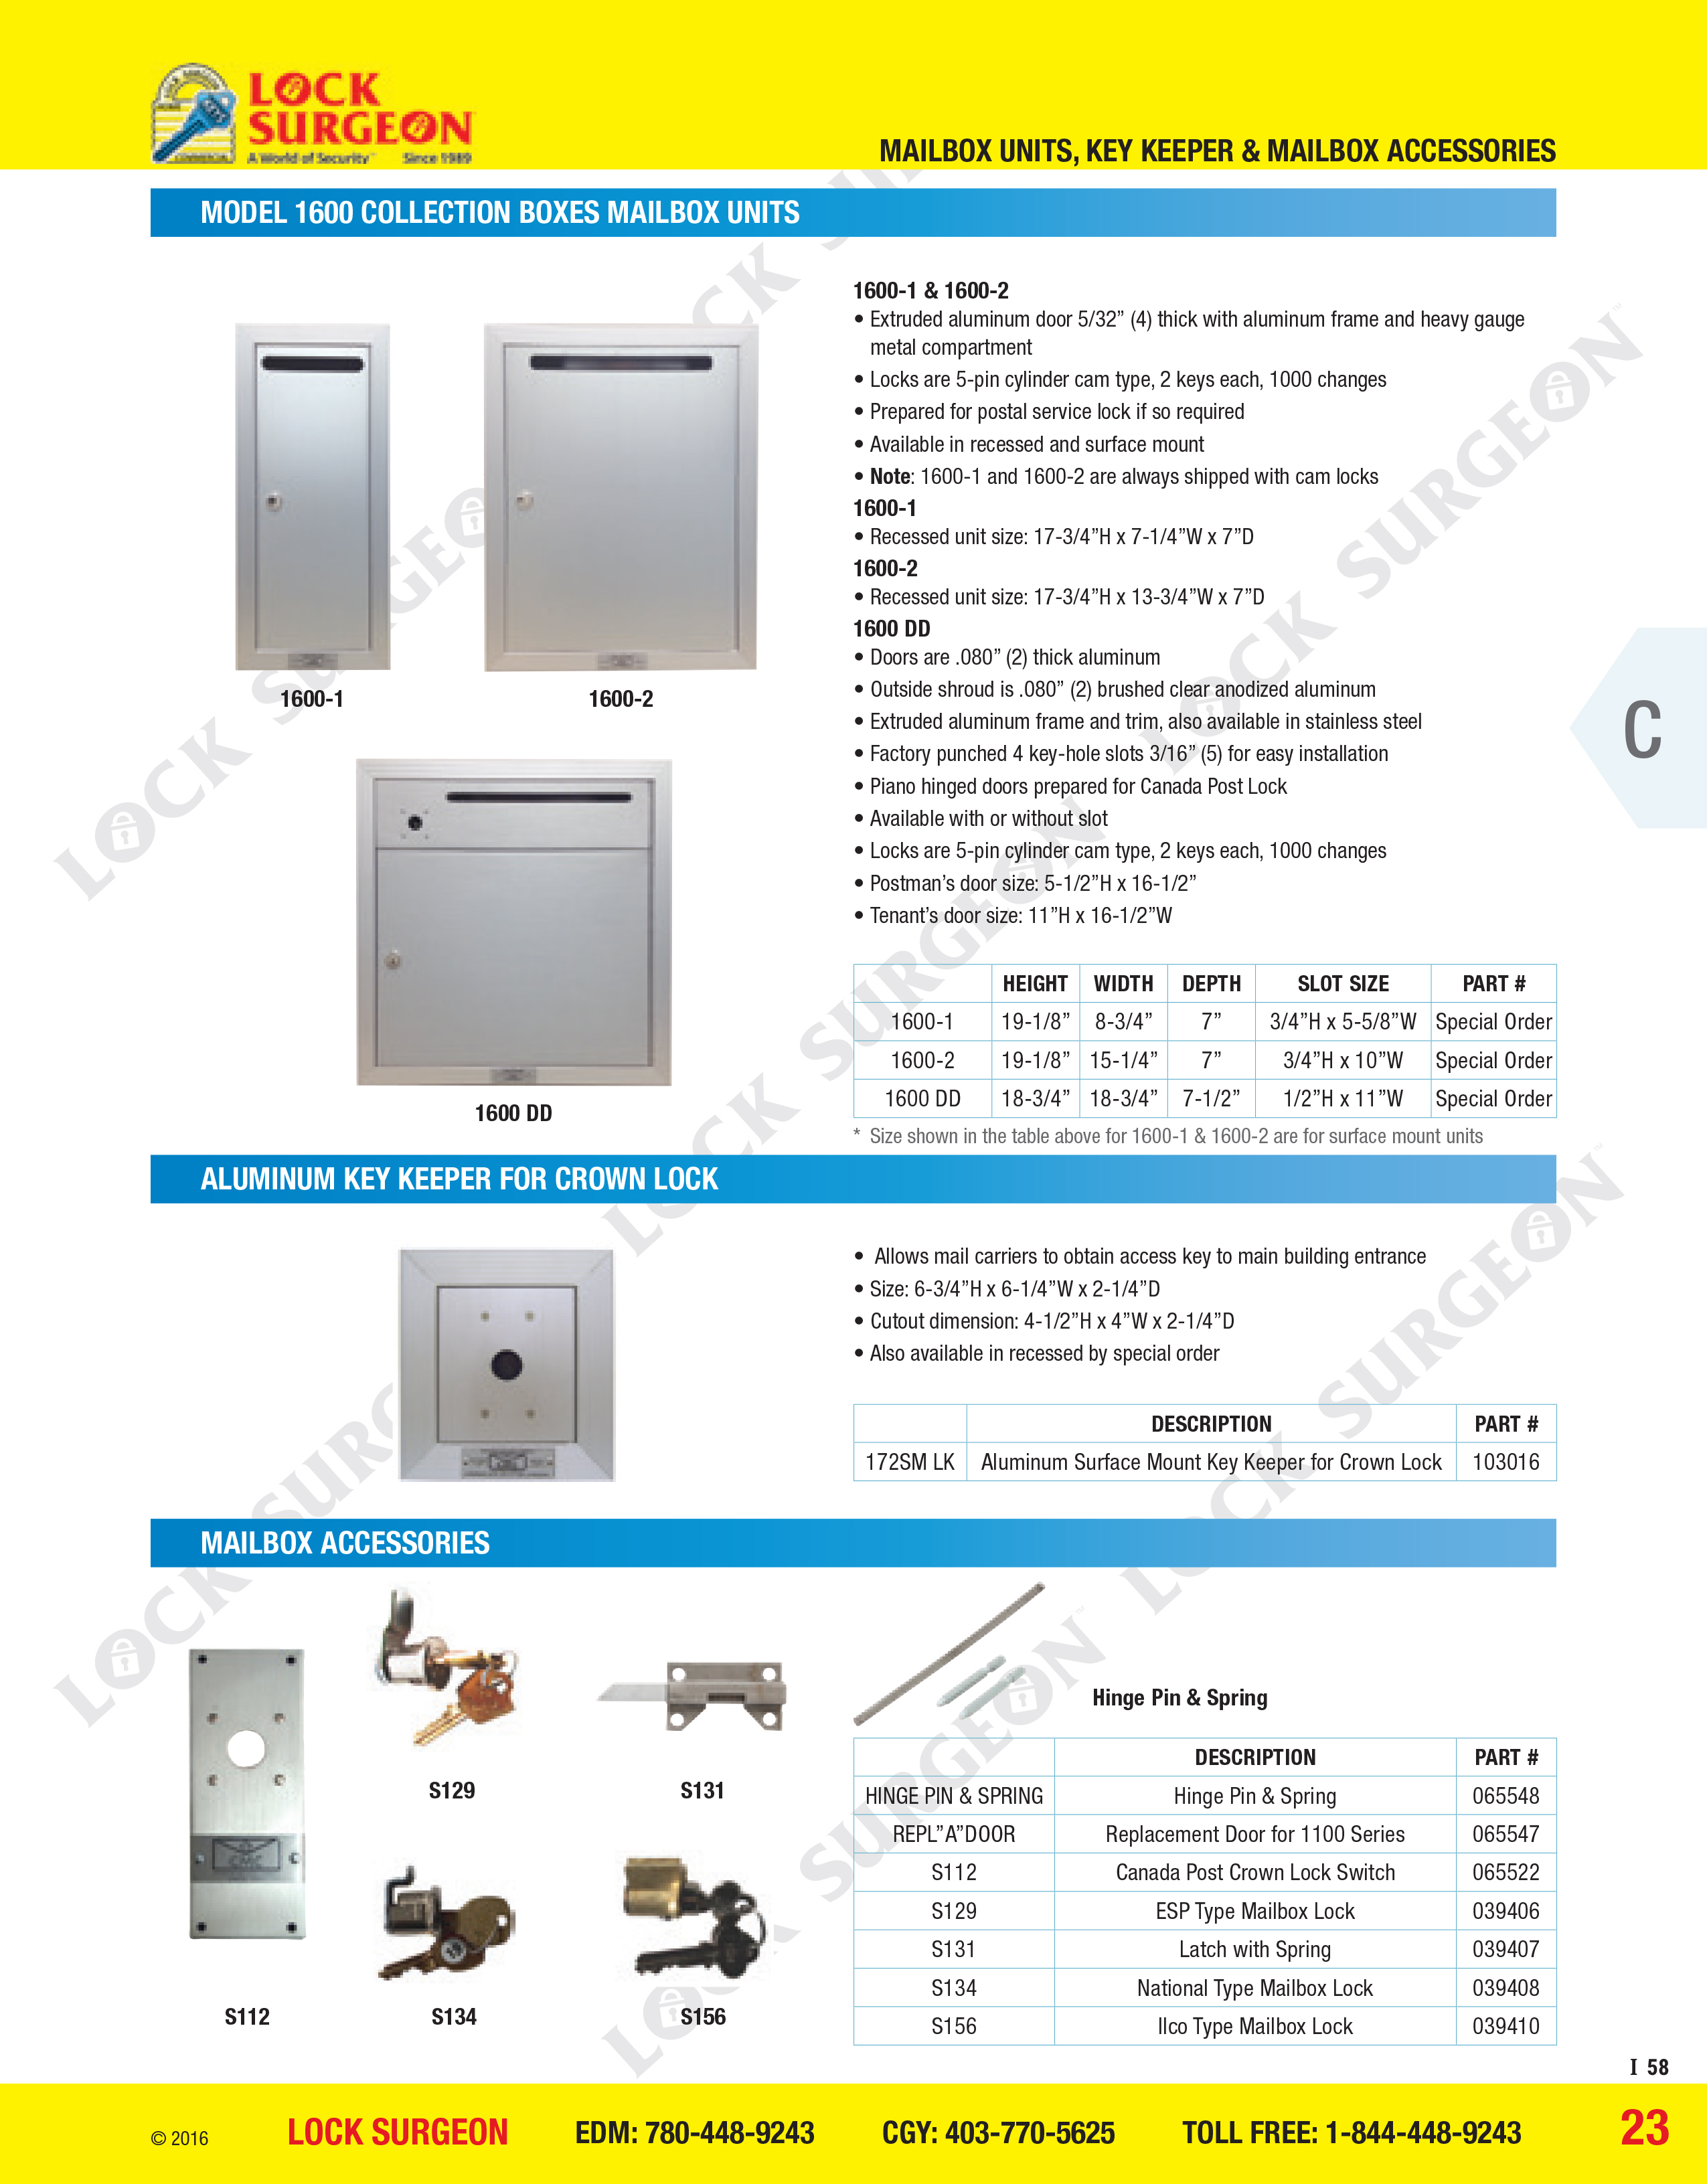 Fort Saskatchewan Model 1600 collection boxes mailbox units, aluminium key keeper for crown lock, Mailbox accessories